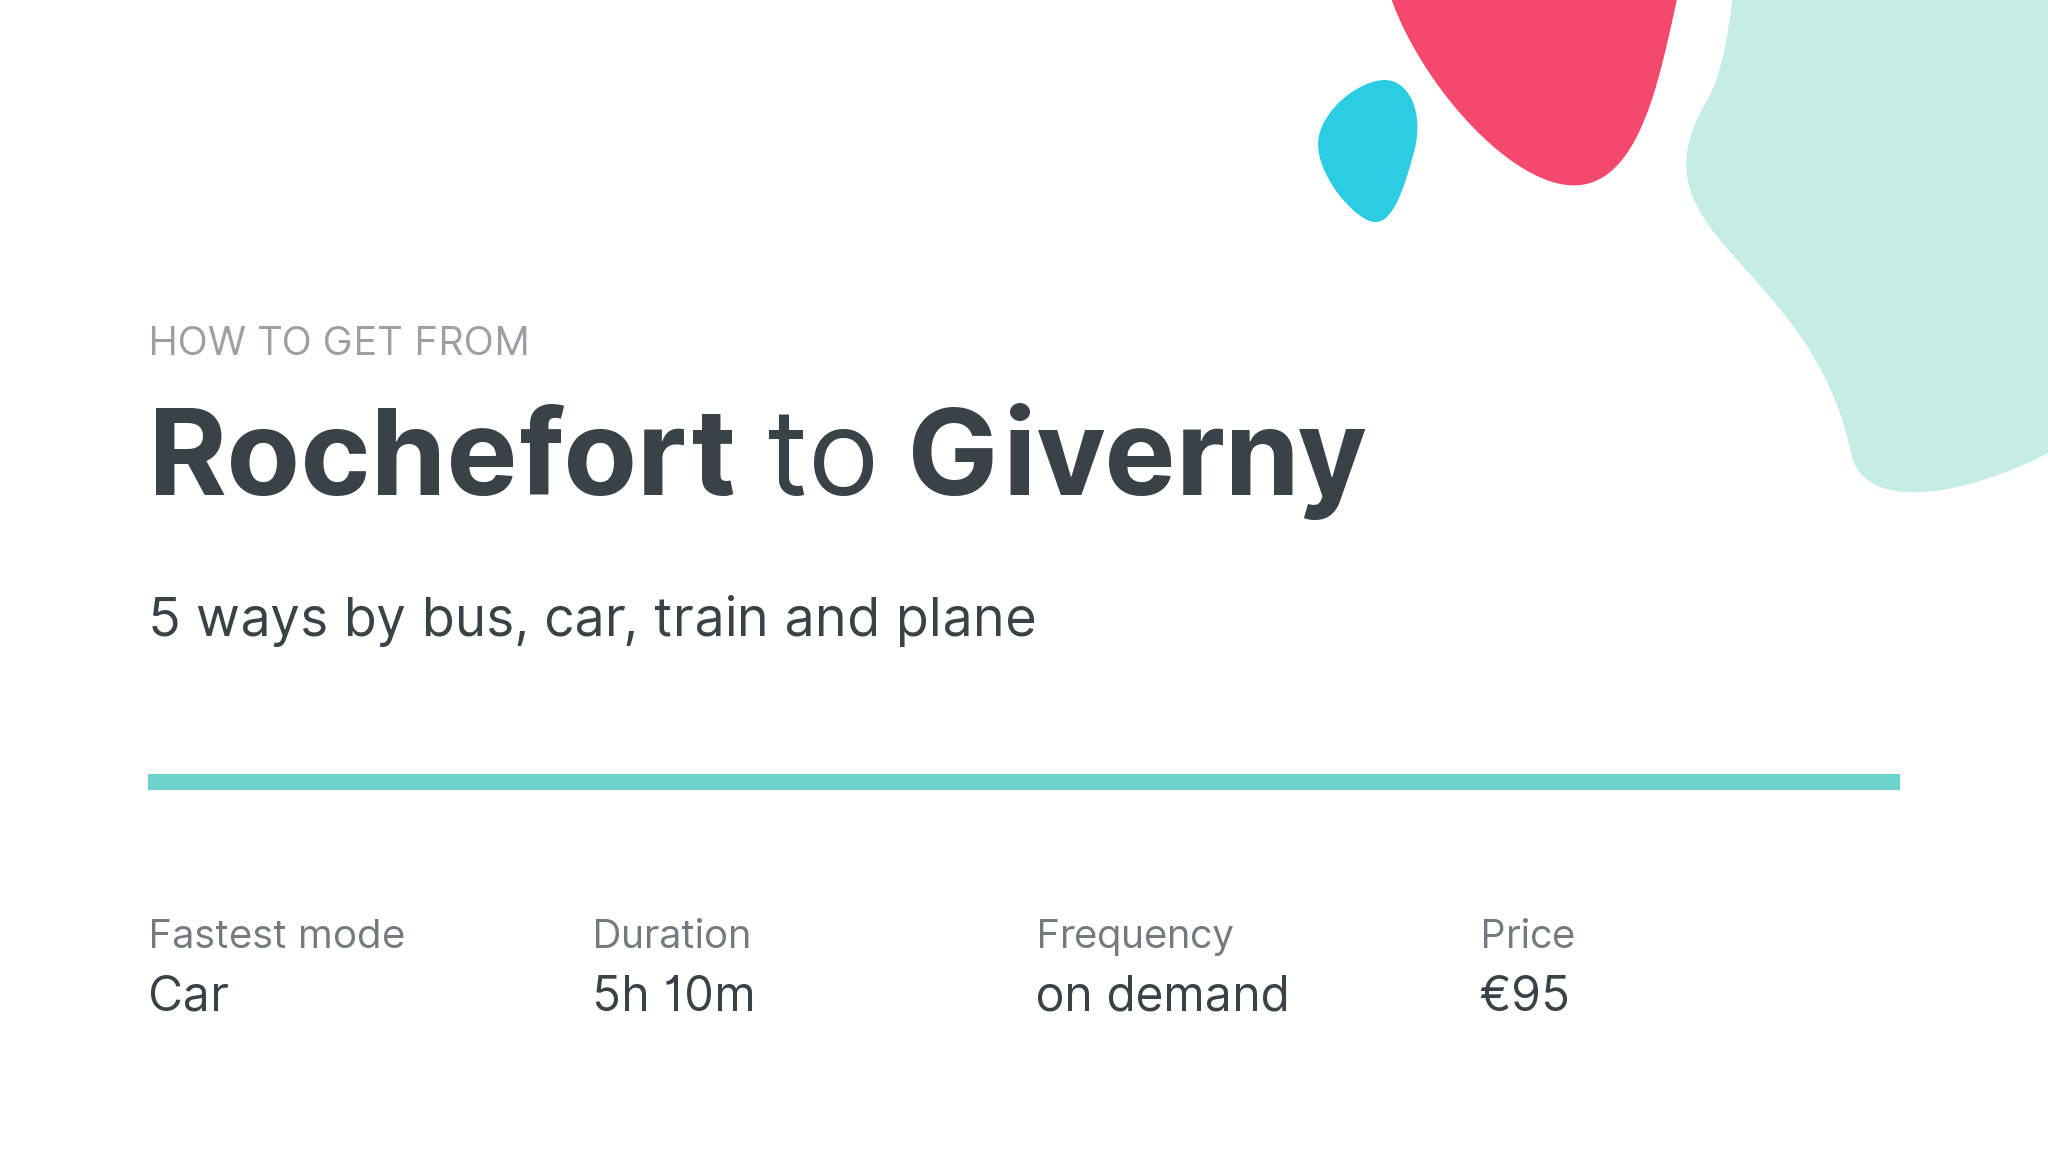 How do I get from Rochefort to Giverny